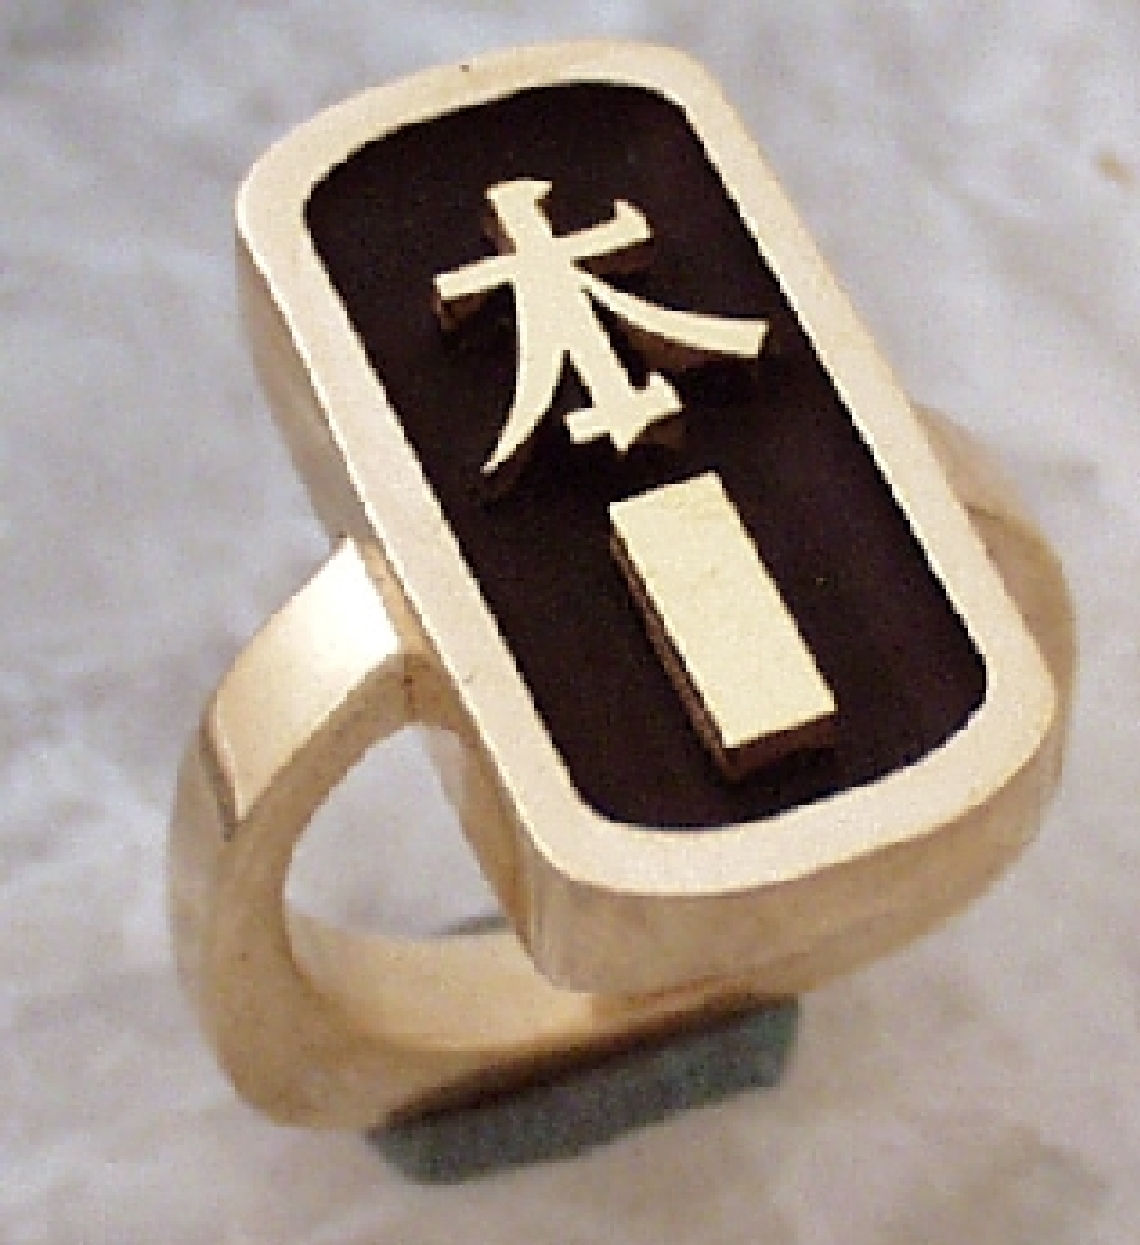 14K yellow gold and black enameling ring with Chinese characters.